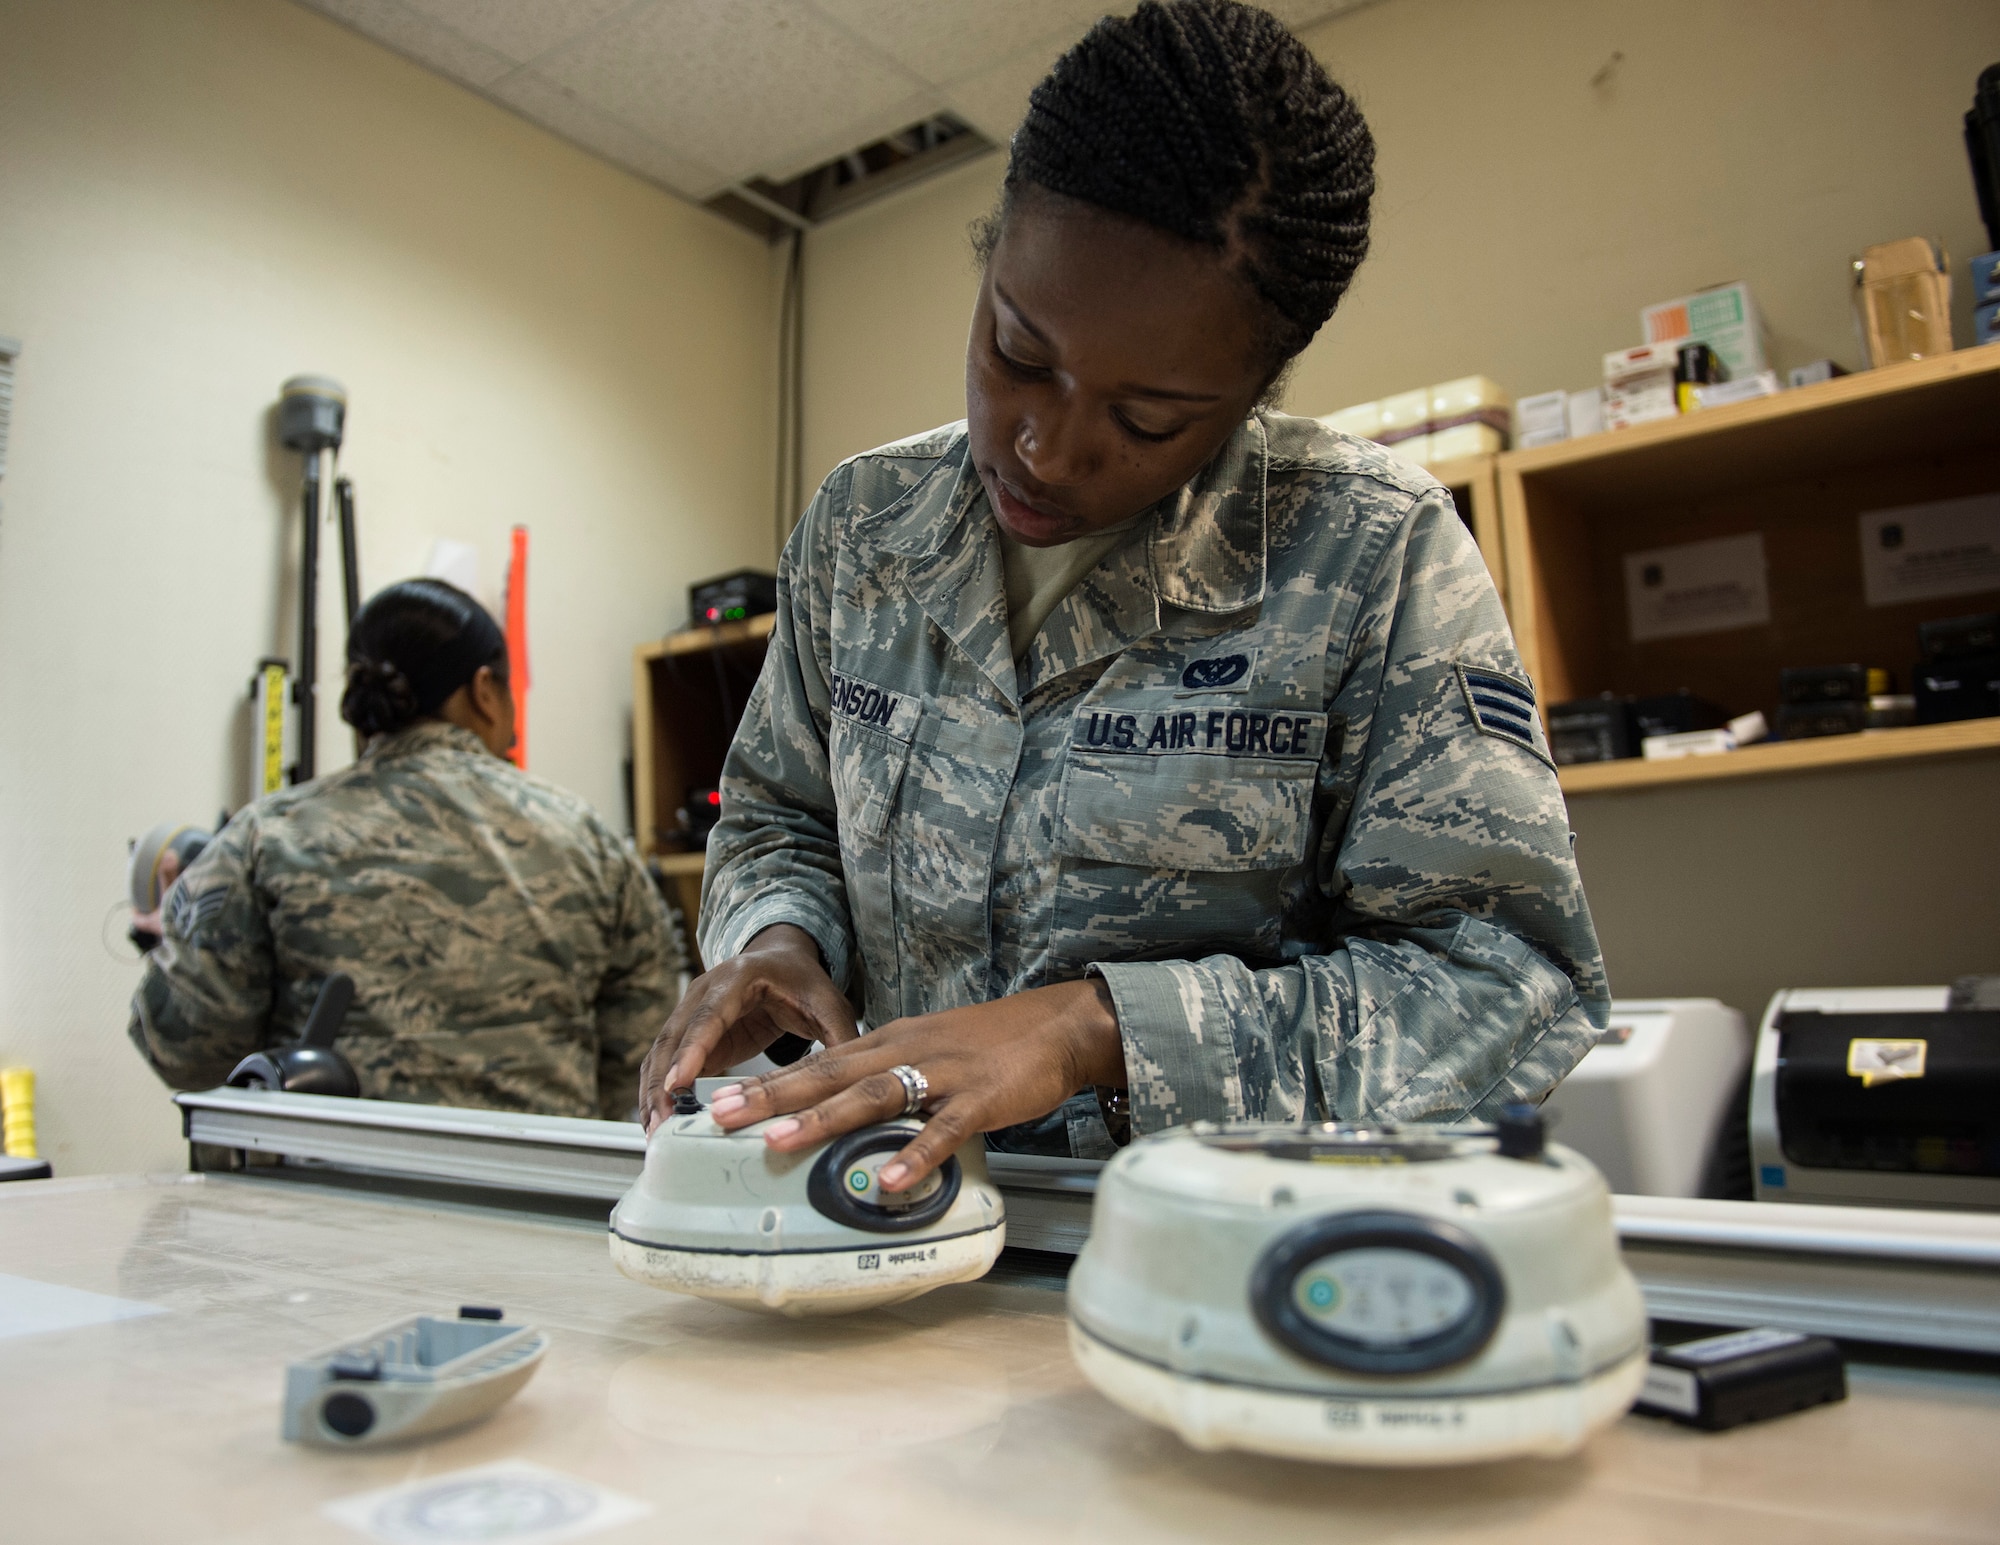 U.S Air Force Senior Airman Dalicia Brenson, an engineering technician with the 379th Expeditionary Civil Engineer Squadron, assembles a Trimble GPS Land Surveying Equipment at Al Udeid Air Base, Qatar, July 25, 2017.